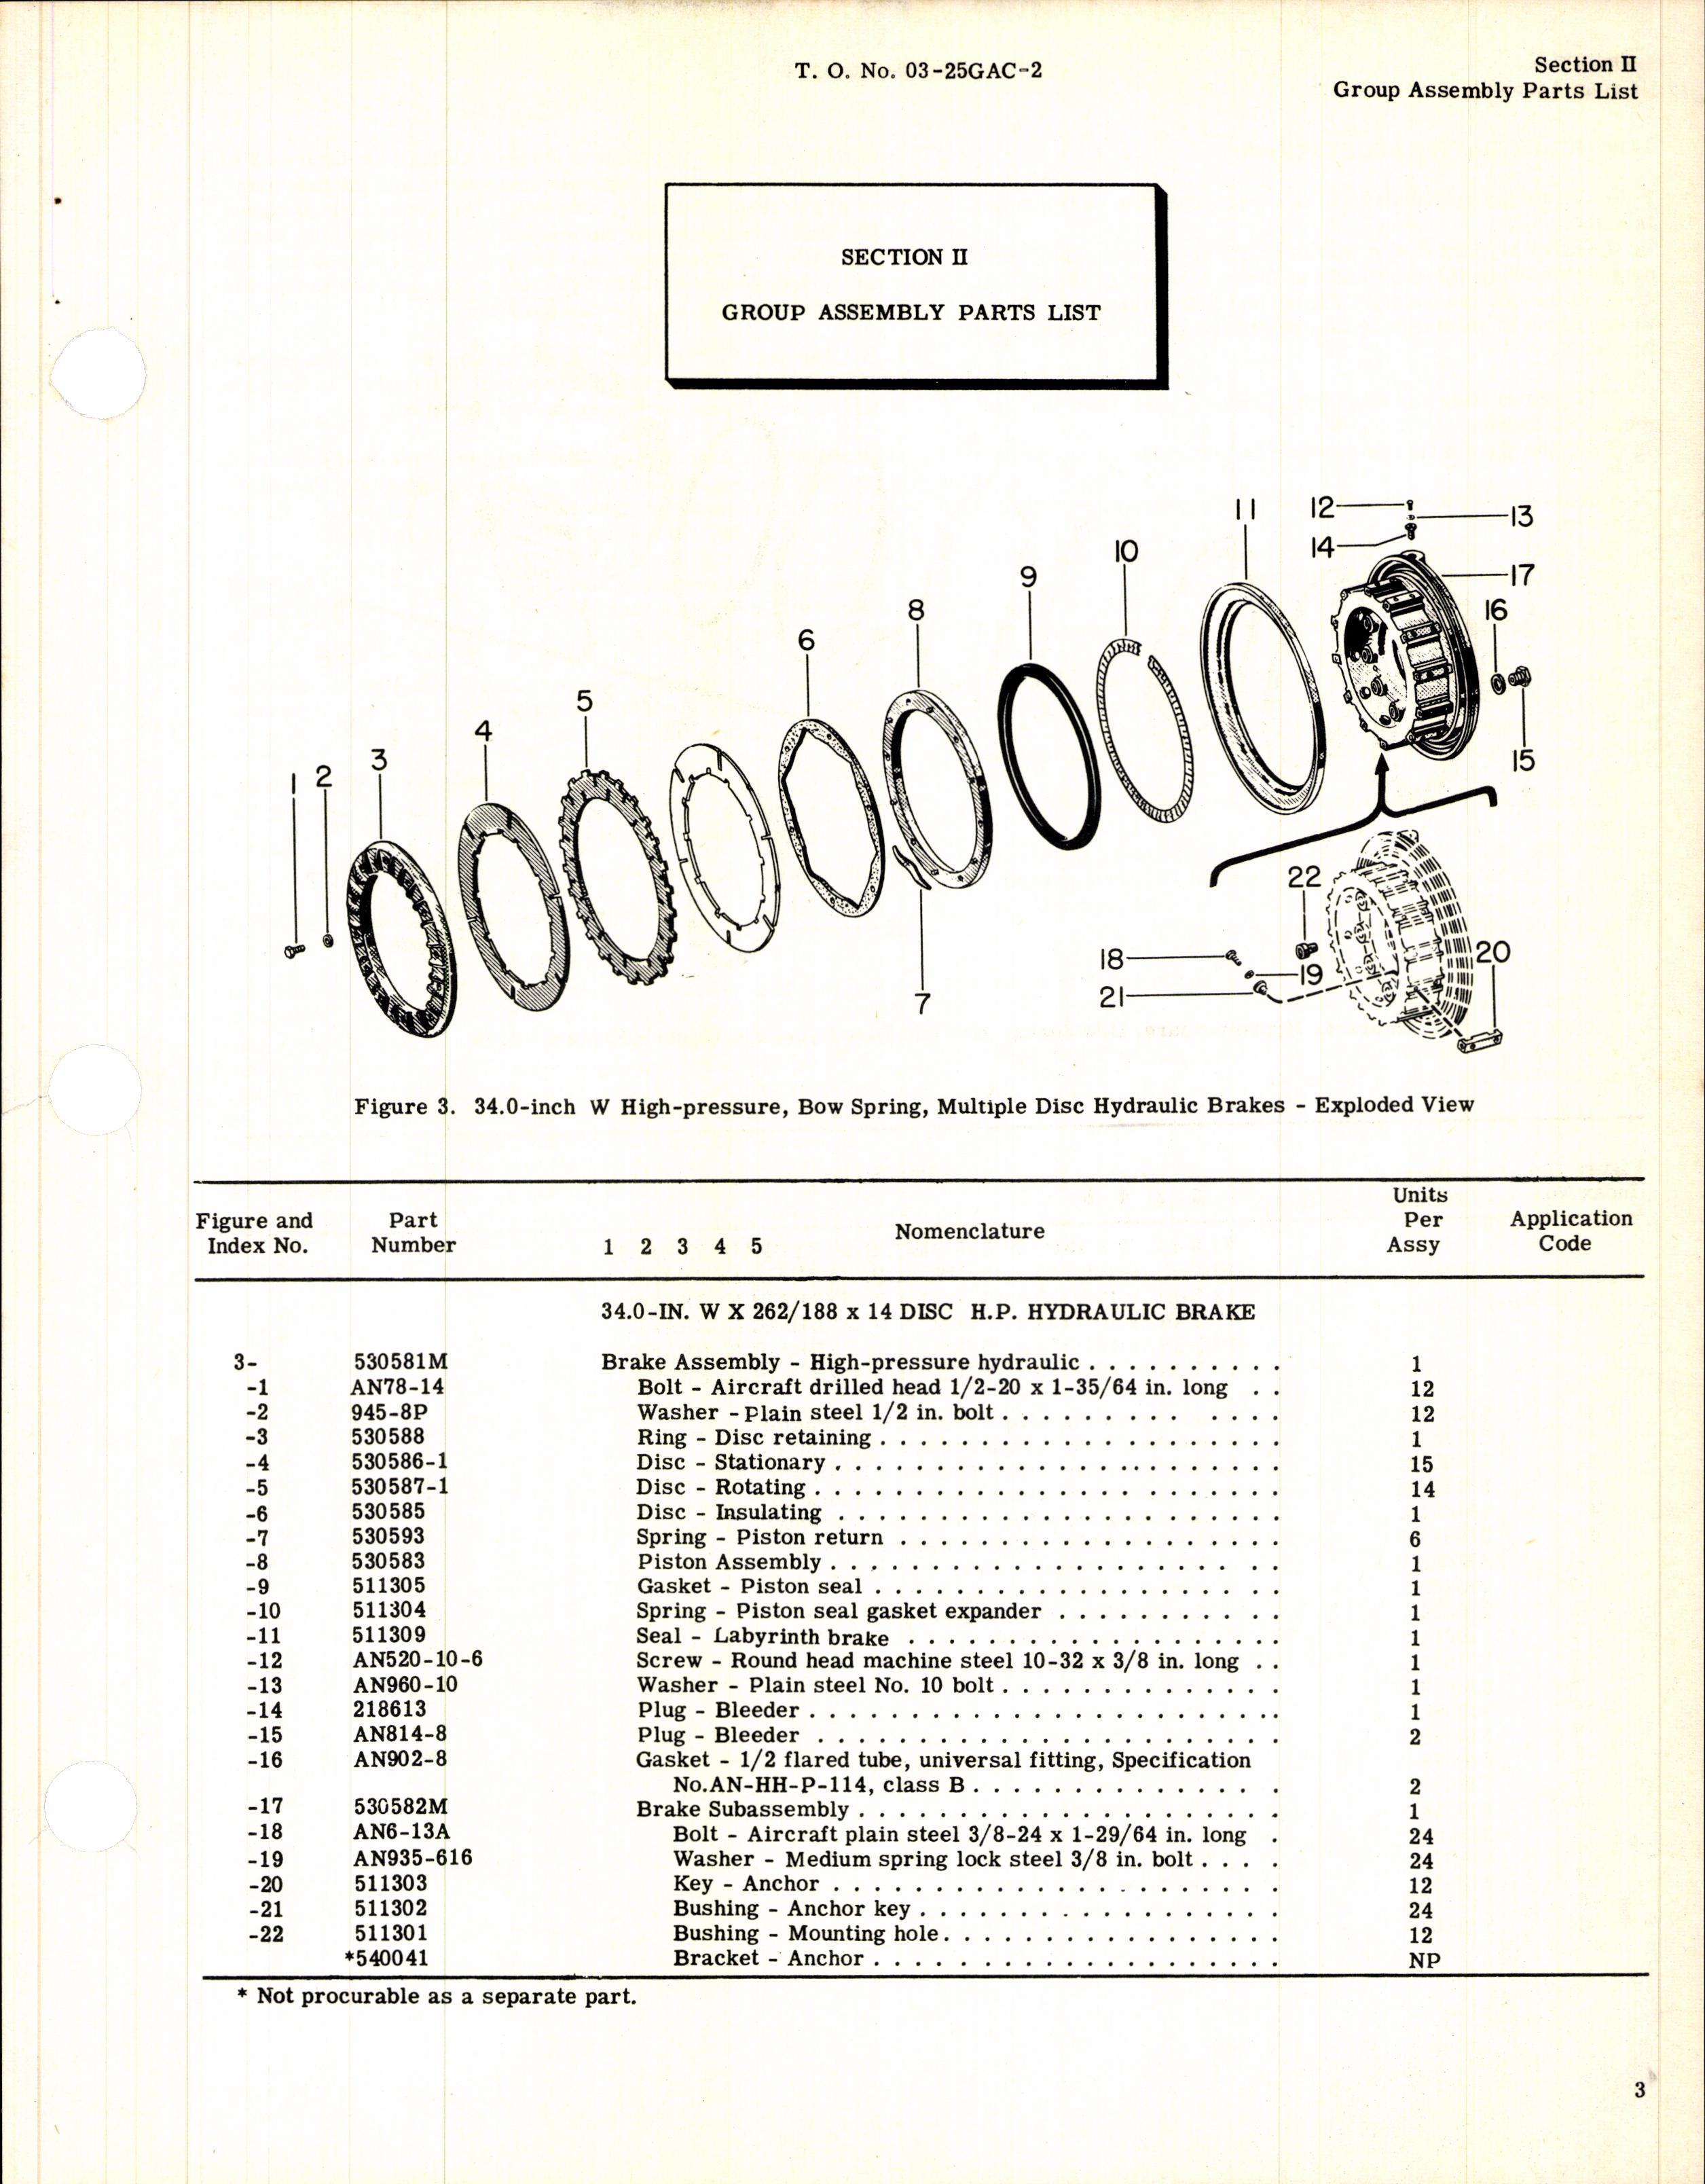 Sample page 7 from AirCorps Library document: Parts Catalog  for Multiple Disk Brakes (Goodyear)